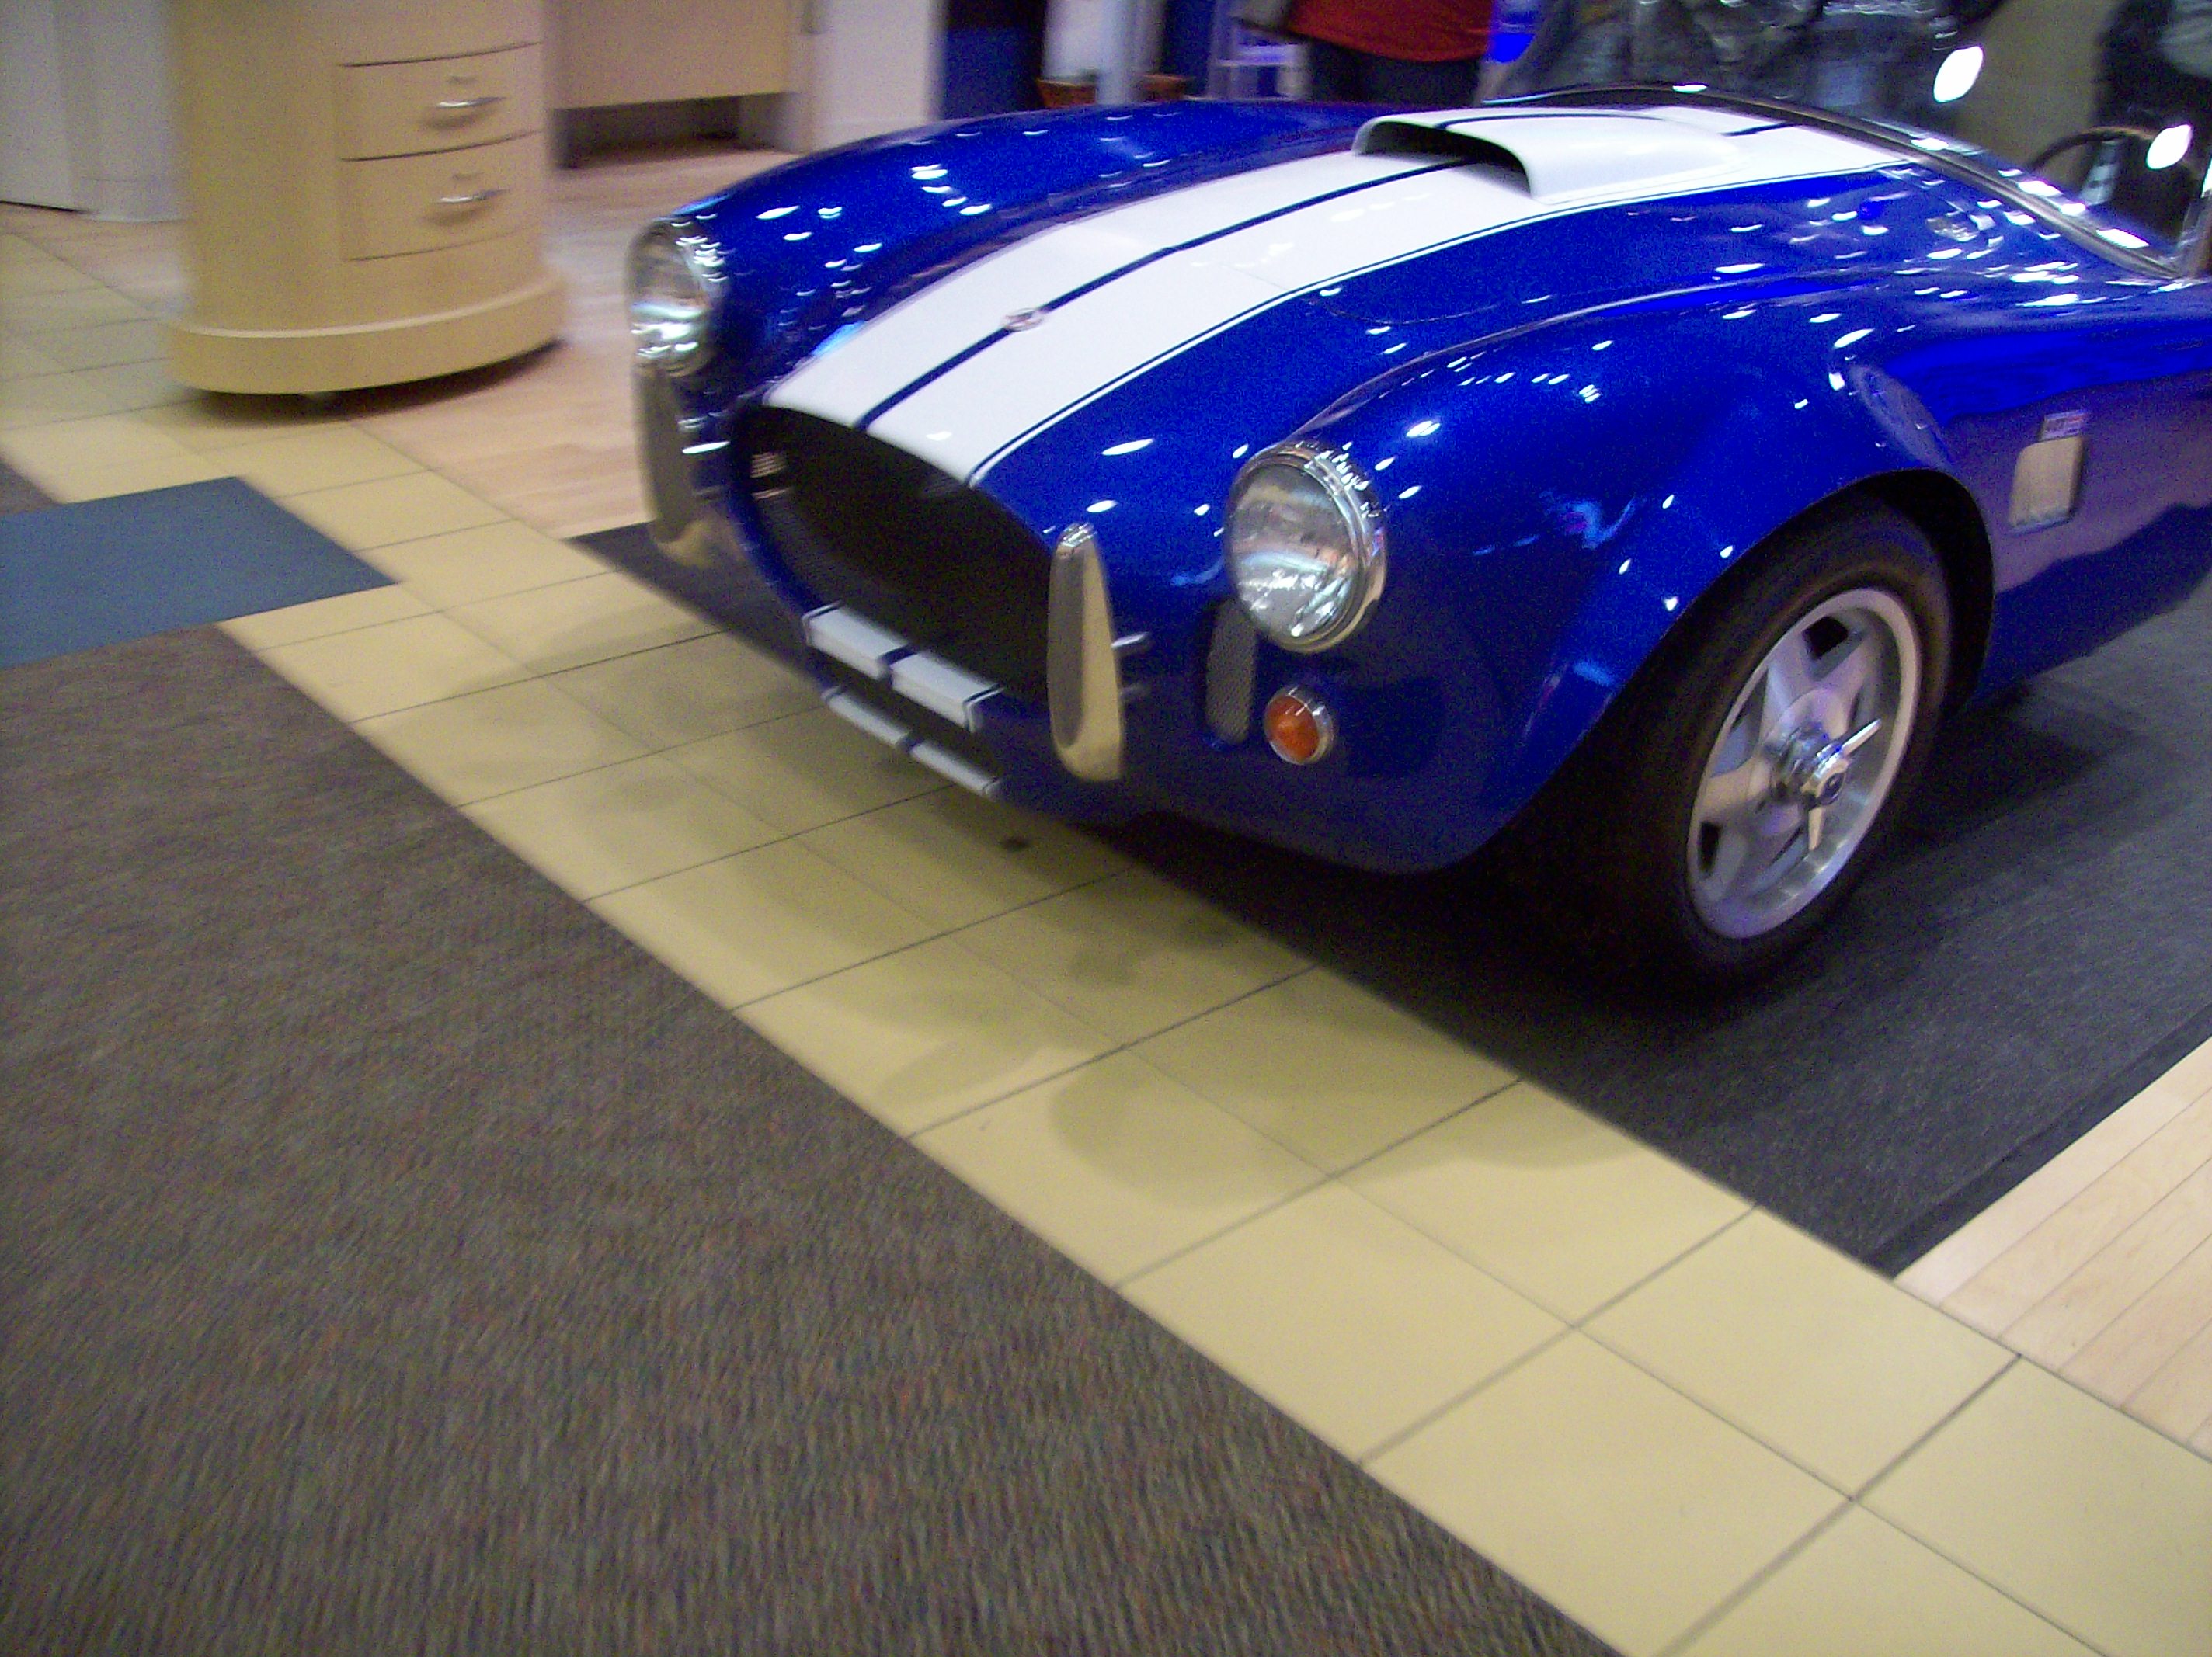 Another front end of a Shelby Cobra replica at a cell phone store ...